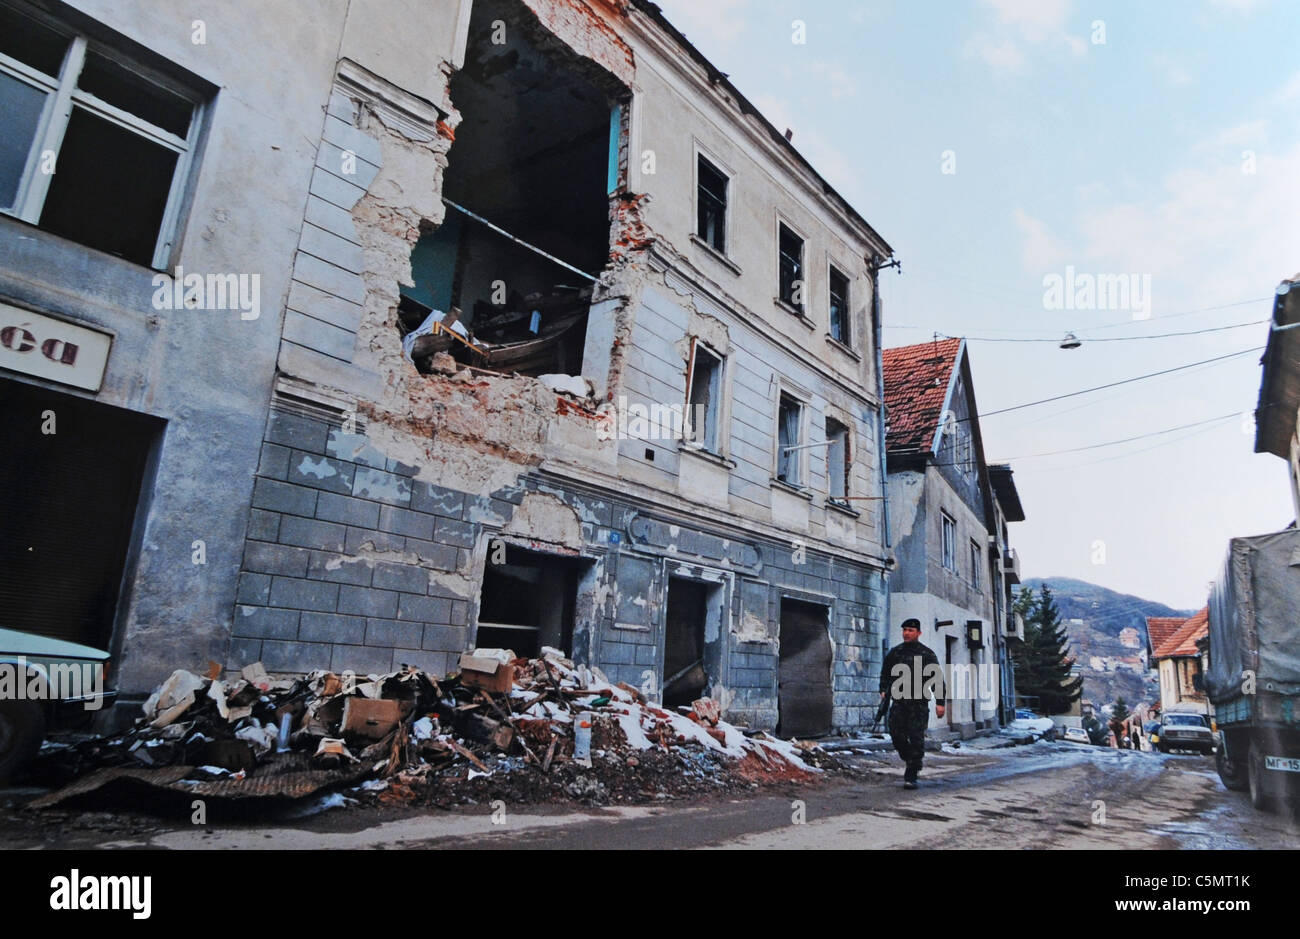 A British soldier from the Sussex Gunners regiment peacekeeping force walks down a completely destroyed street in Mrkonjic Grad  Bosnia - The Bosnian War was an international armed conflict that took place in Bosnia and Herzegovina between 1992 and 1995. Following a number of violent incidents in early 1992, the war is commonly viewed as having started on 6 April 1992. The war ended on 14 December 1995. - Photograph by Simon Dack 1996 Stock Photo